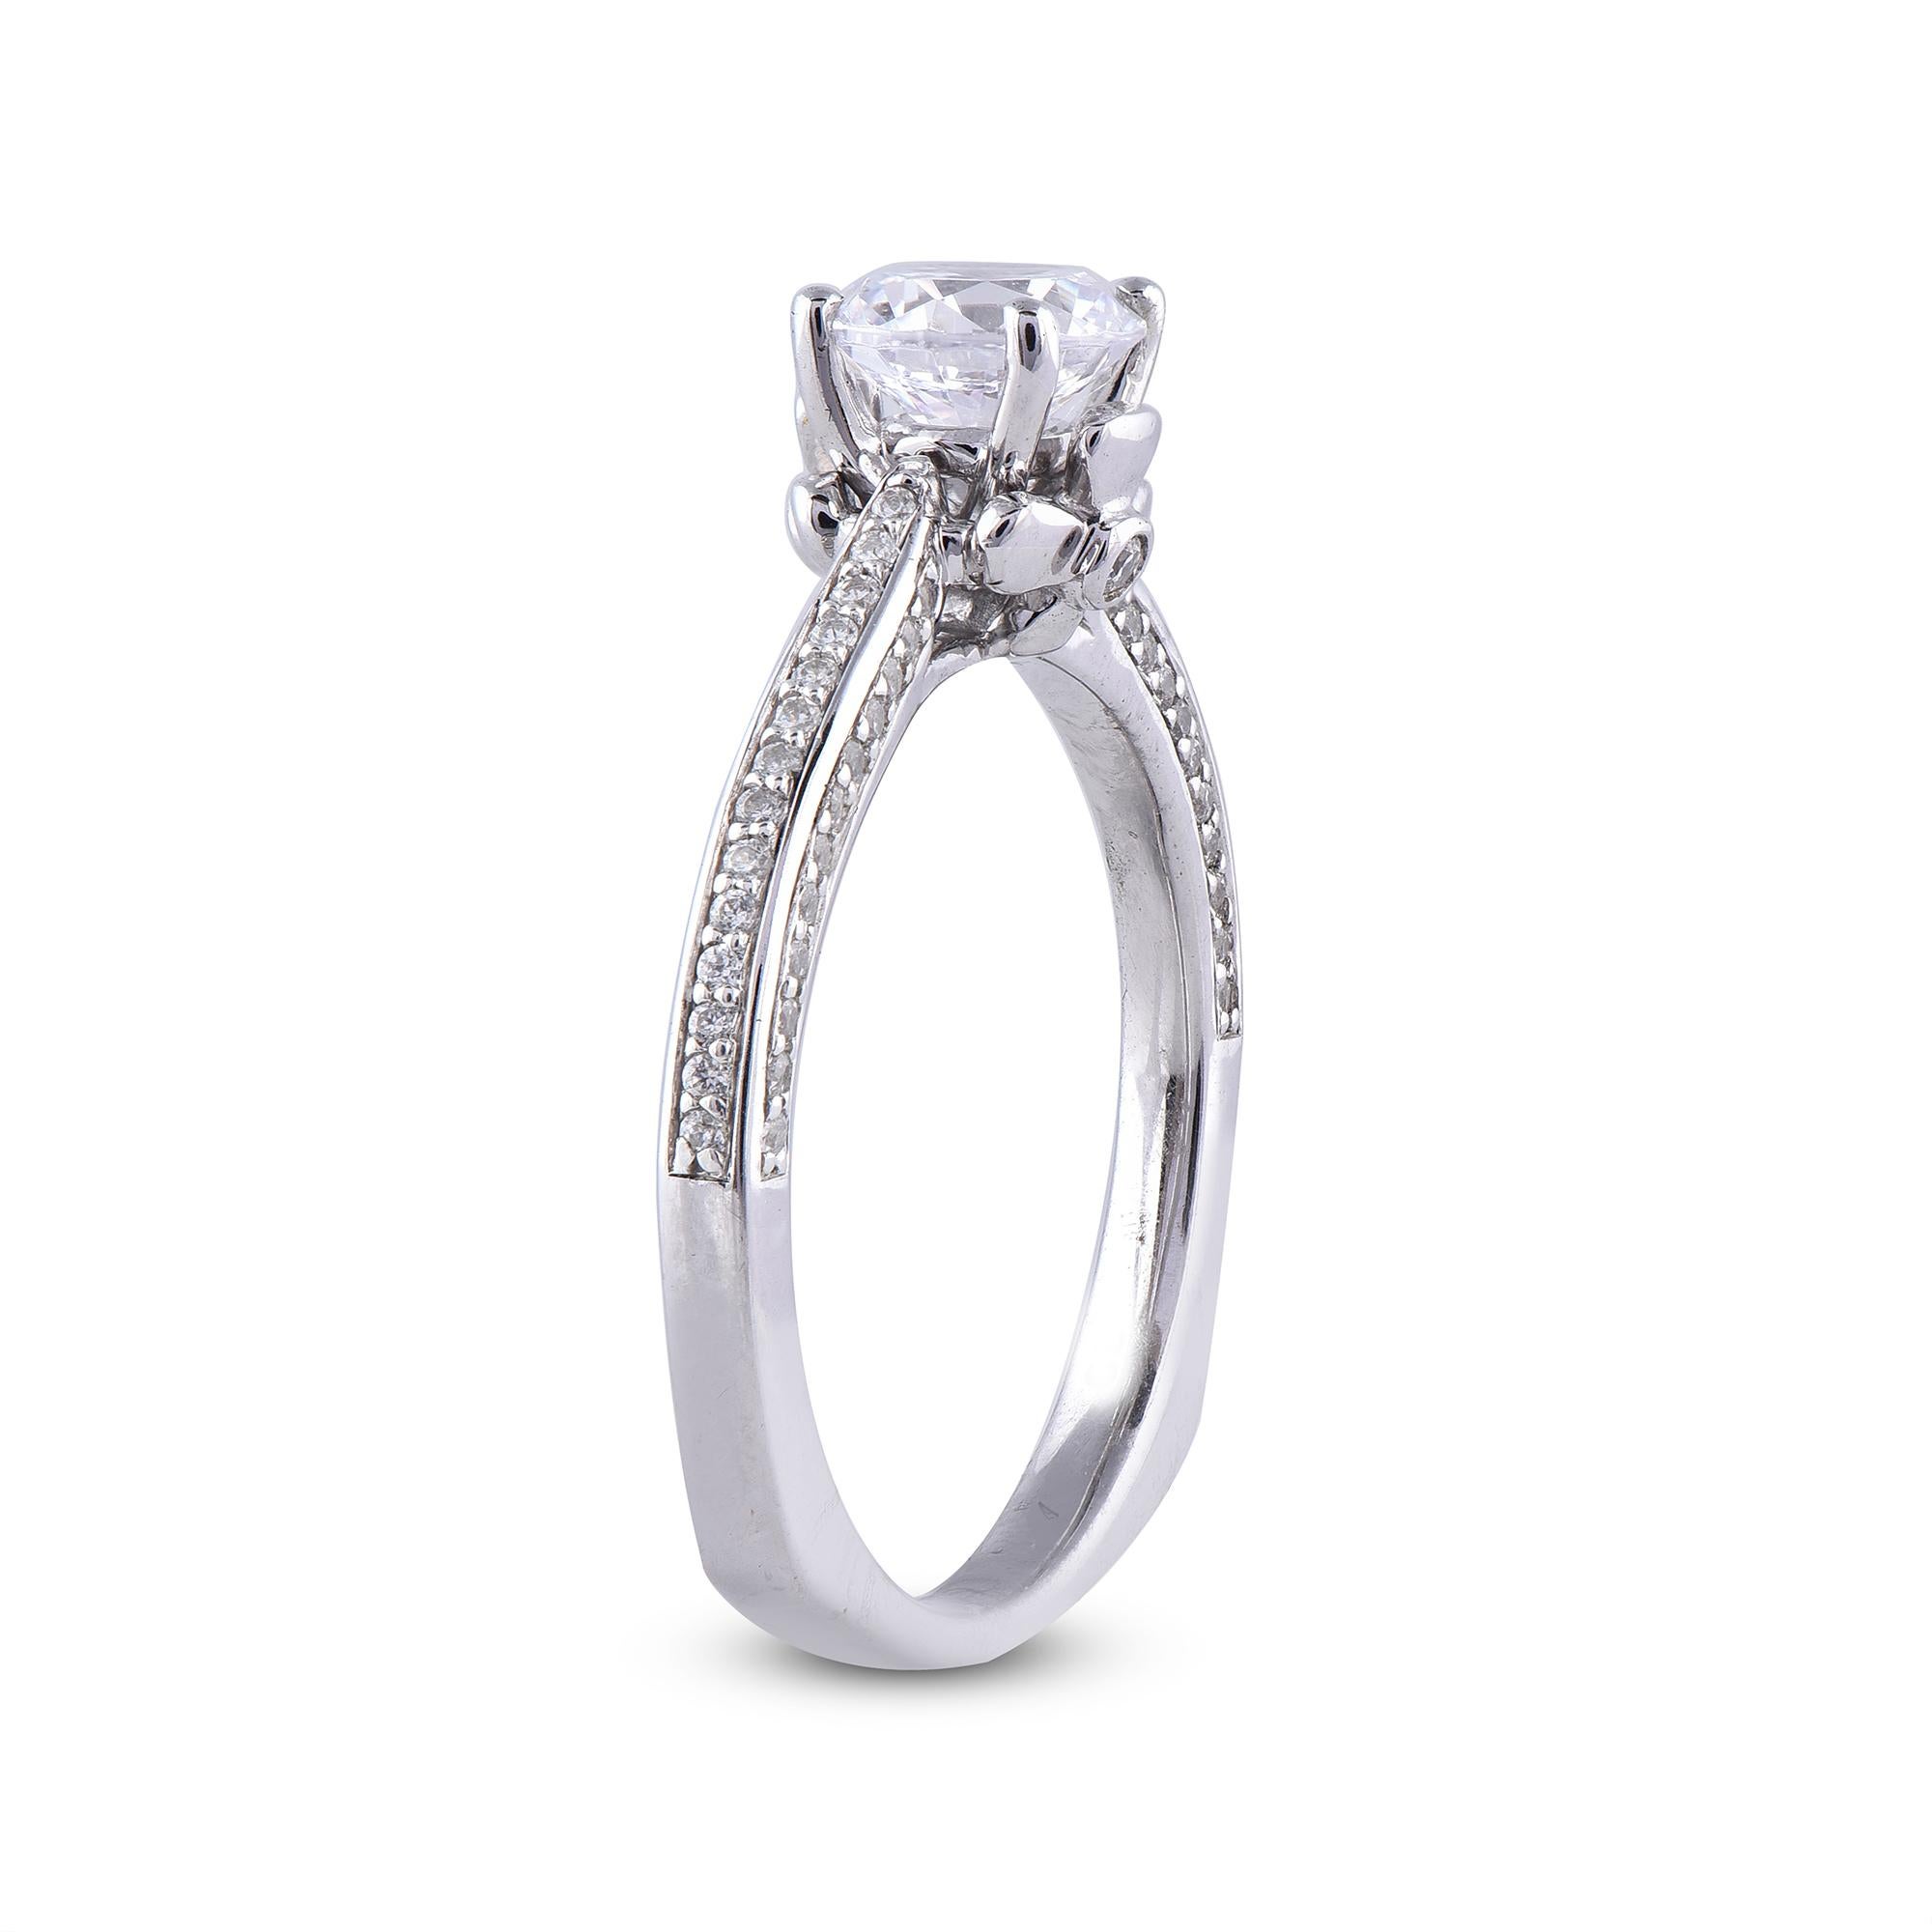 Truly exquisite, this 0.80 ct of centre stone and 0.20 ct of lined shank diamond ring is sure to be admired for the inherent classic beauty and elegance within its design. The total weight of diamonds 1.00 carat, G-H color, SI1 clarity and studded